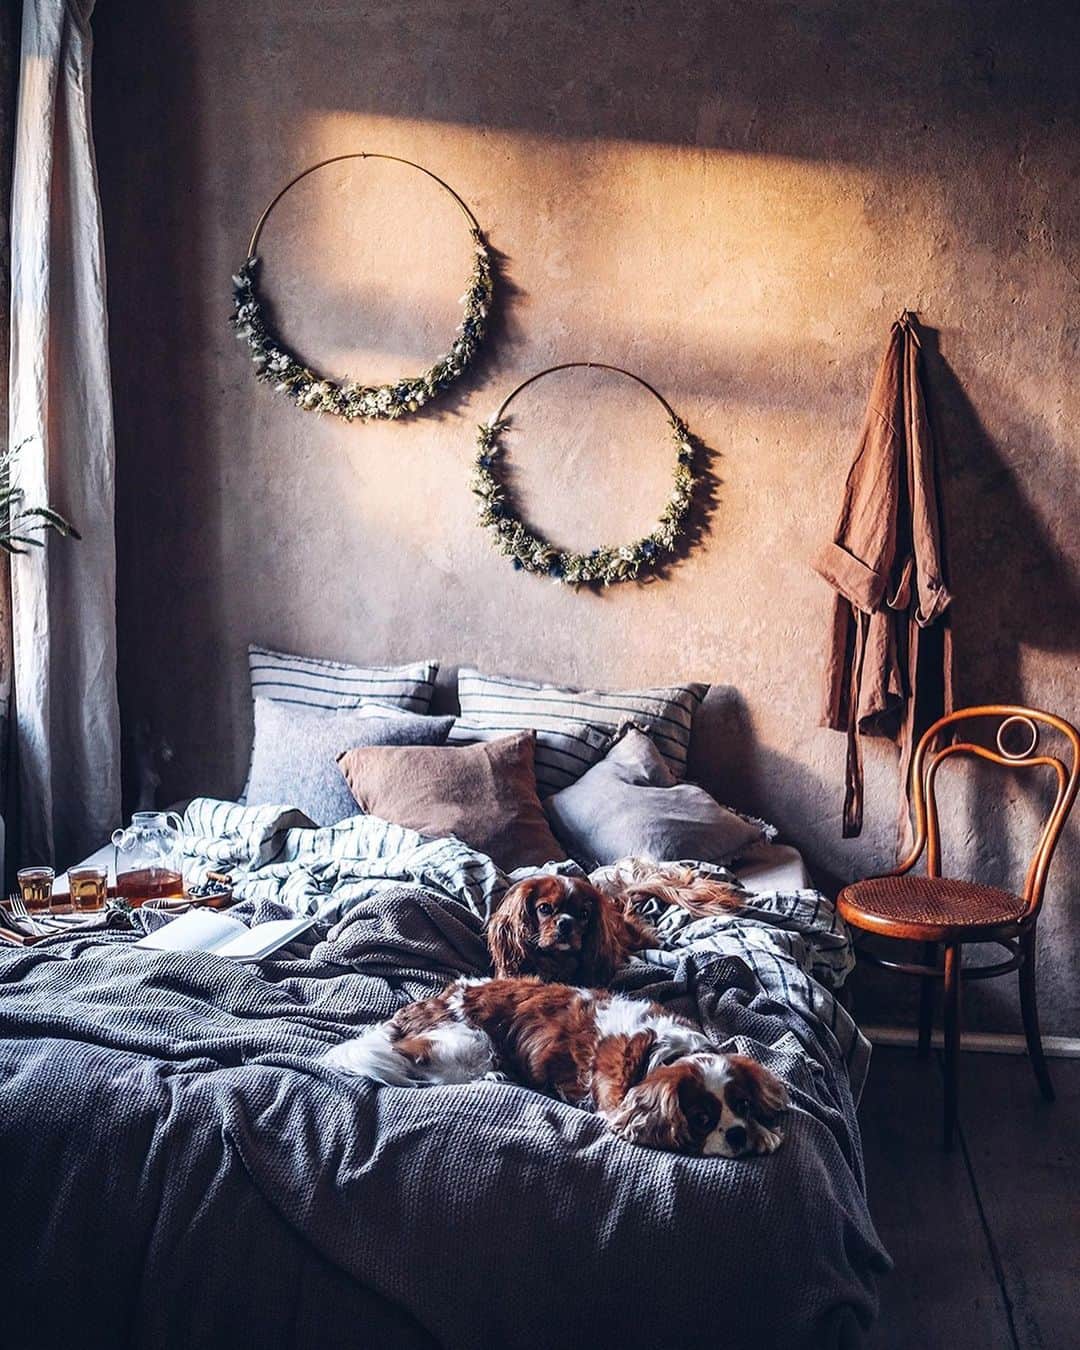 Our Food Storiesのインスタグラム：「Werbung|Advertisement We have a wonderful GIVE-AWAY with @lovely.linen for you guys to celebrate the first Sunday in advent 🎄You can win one duvet cover and one pillow cover from @lovely.linen of your choice. All you have to do is: -follow @lovely.linen  -write a comment on the blog, link is in profile  The give-away is worldwide and ends on the 06th of December 2020. The winner will be drawn by lot and contacted via DM. Good luck everyone 🌟❣️ We absolutely love the cozy bedlinen from @lovely.linen and enjoyed a wonderful breakfast in bed. You can also the find the recipe for the gluten-free Dutch baby with coconut cream, oranges, blueberries and caramelized hazelnuts on the blog, link is in profile. #lovelylinen *This give-away is not sponsored, endorsed or administered by Instagram. ____ #bedlinen #linenlove #cozyhome #cavalierkingcharles #adventsunday #fellowmag #momentslikethese #countrysideliving #simplejoys #foodphotographer #foodstylist #germanfoodblogger #breakfastinbed #breakfastrecipe #dutchbaby #glutenfri #glutenfree #glutenfrei」